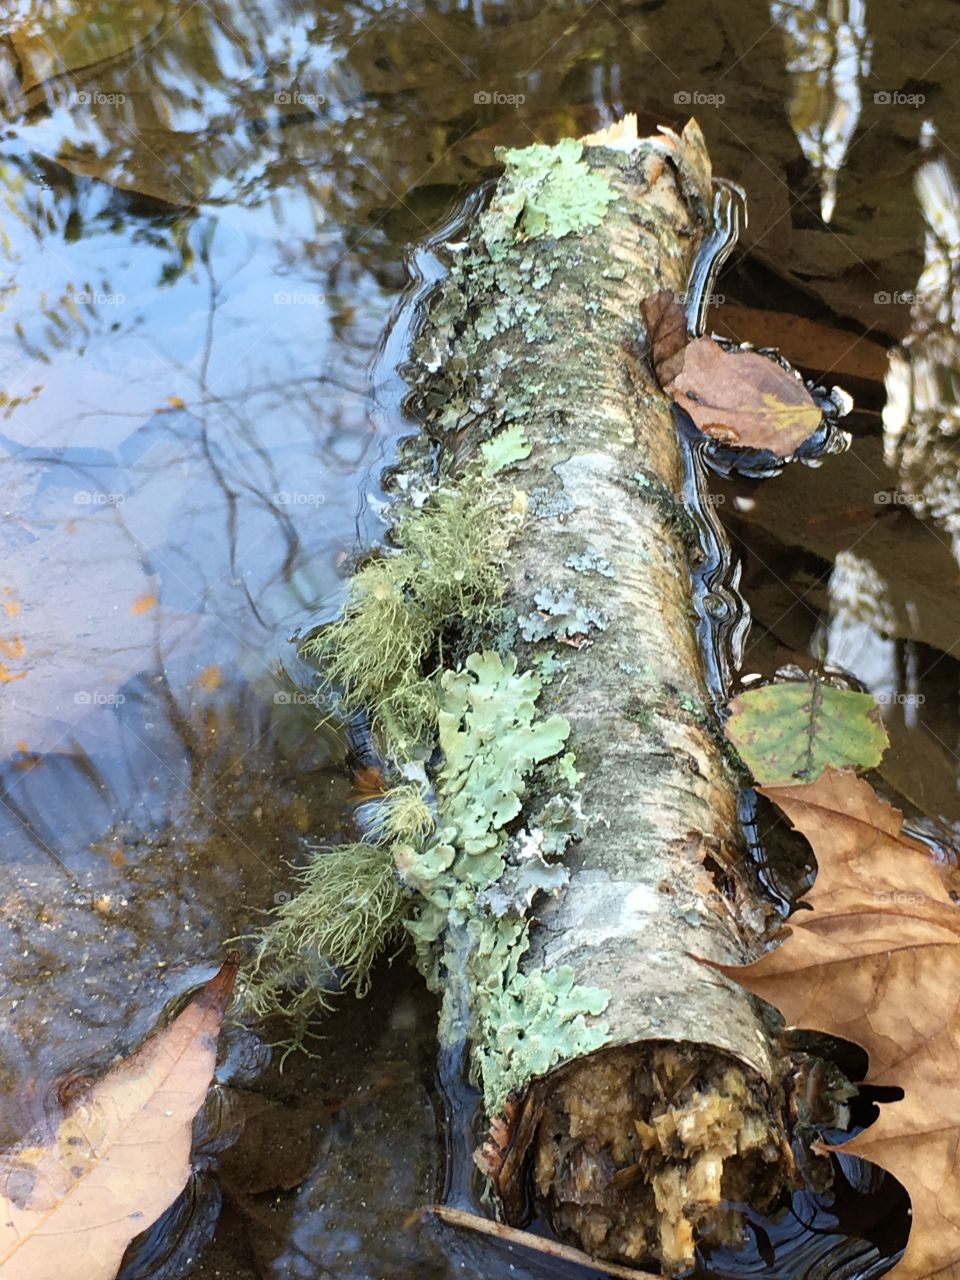 Moss covered